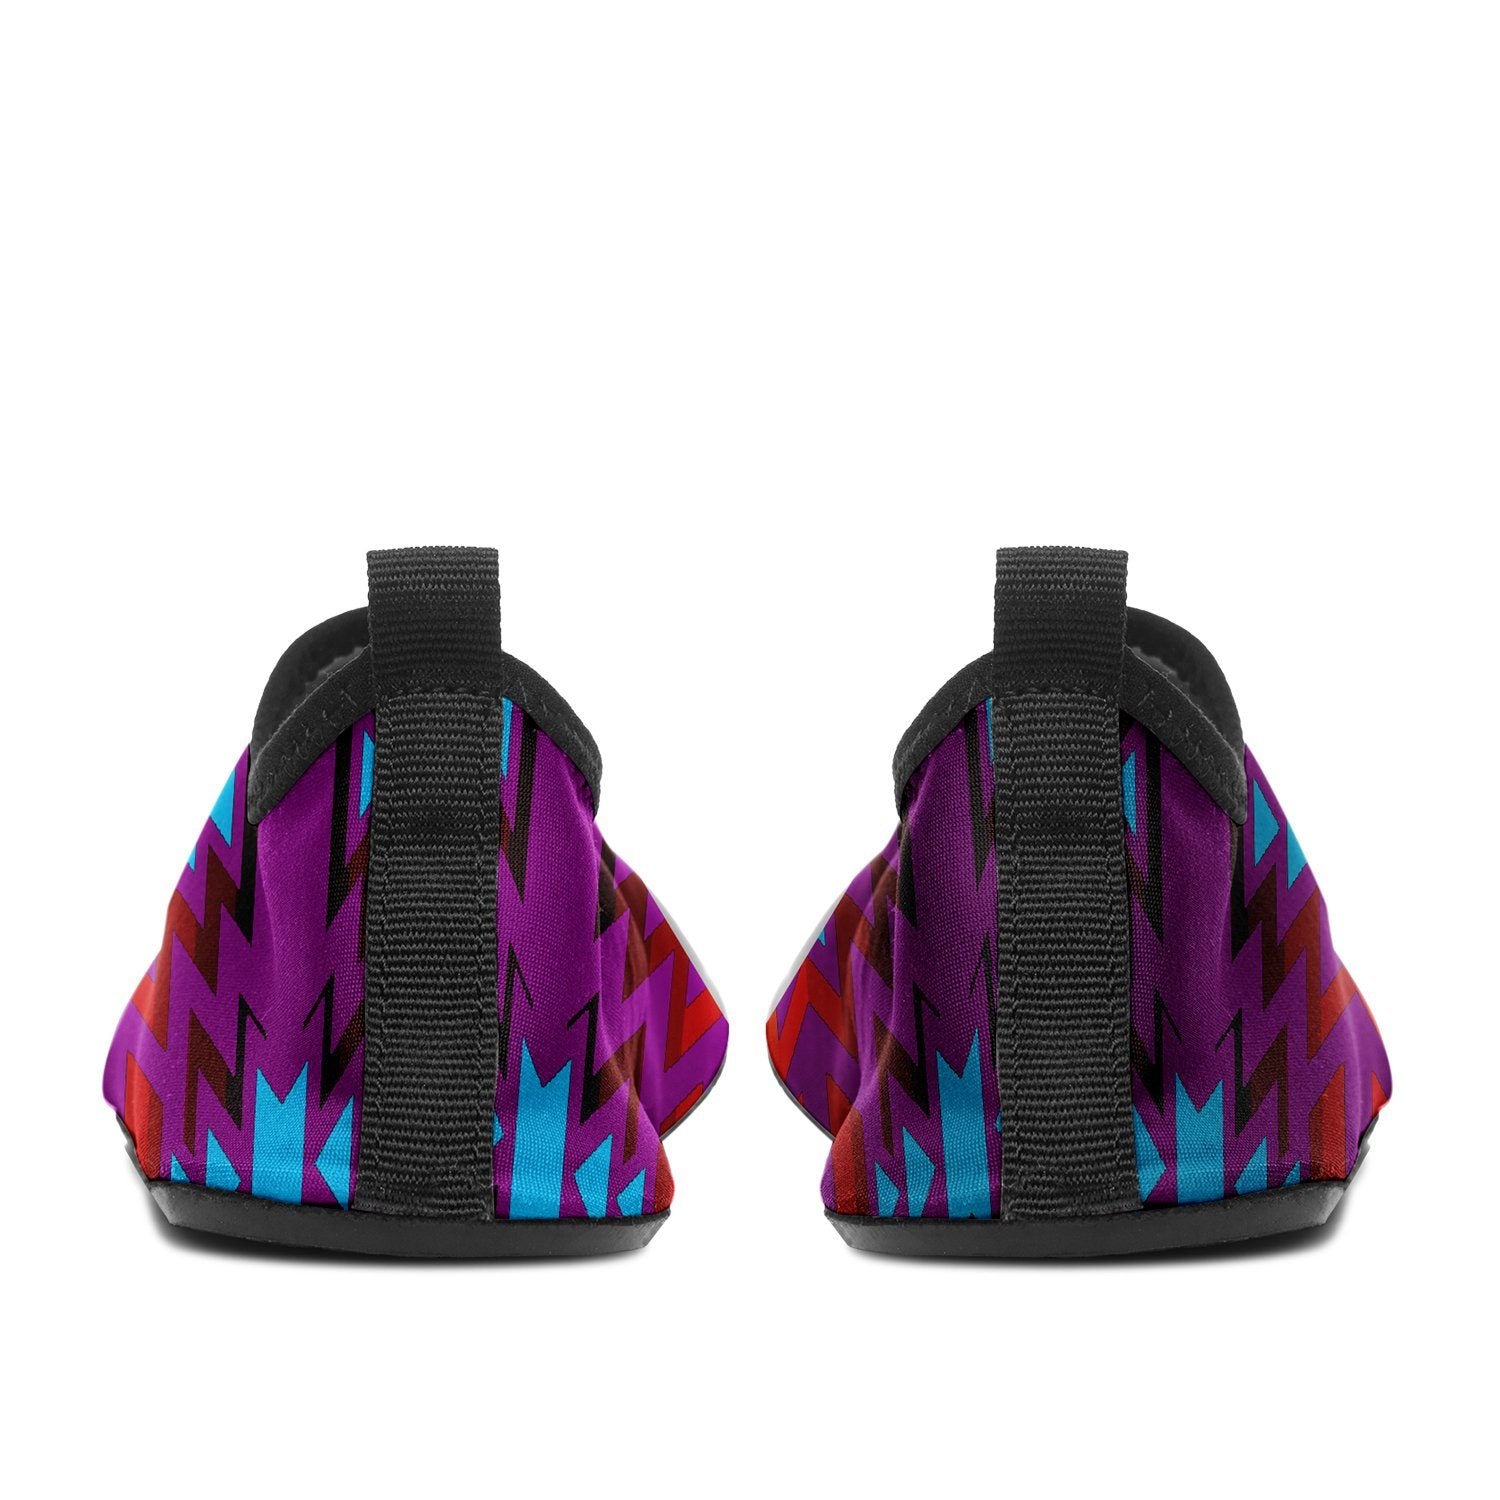 Fire Colors and Turquoise Purple Sockamoccs Slip On Shoes 49 Dzine 